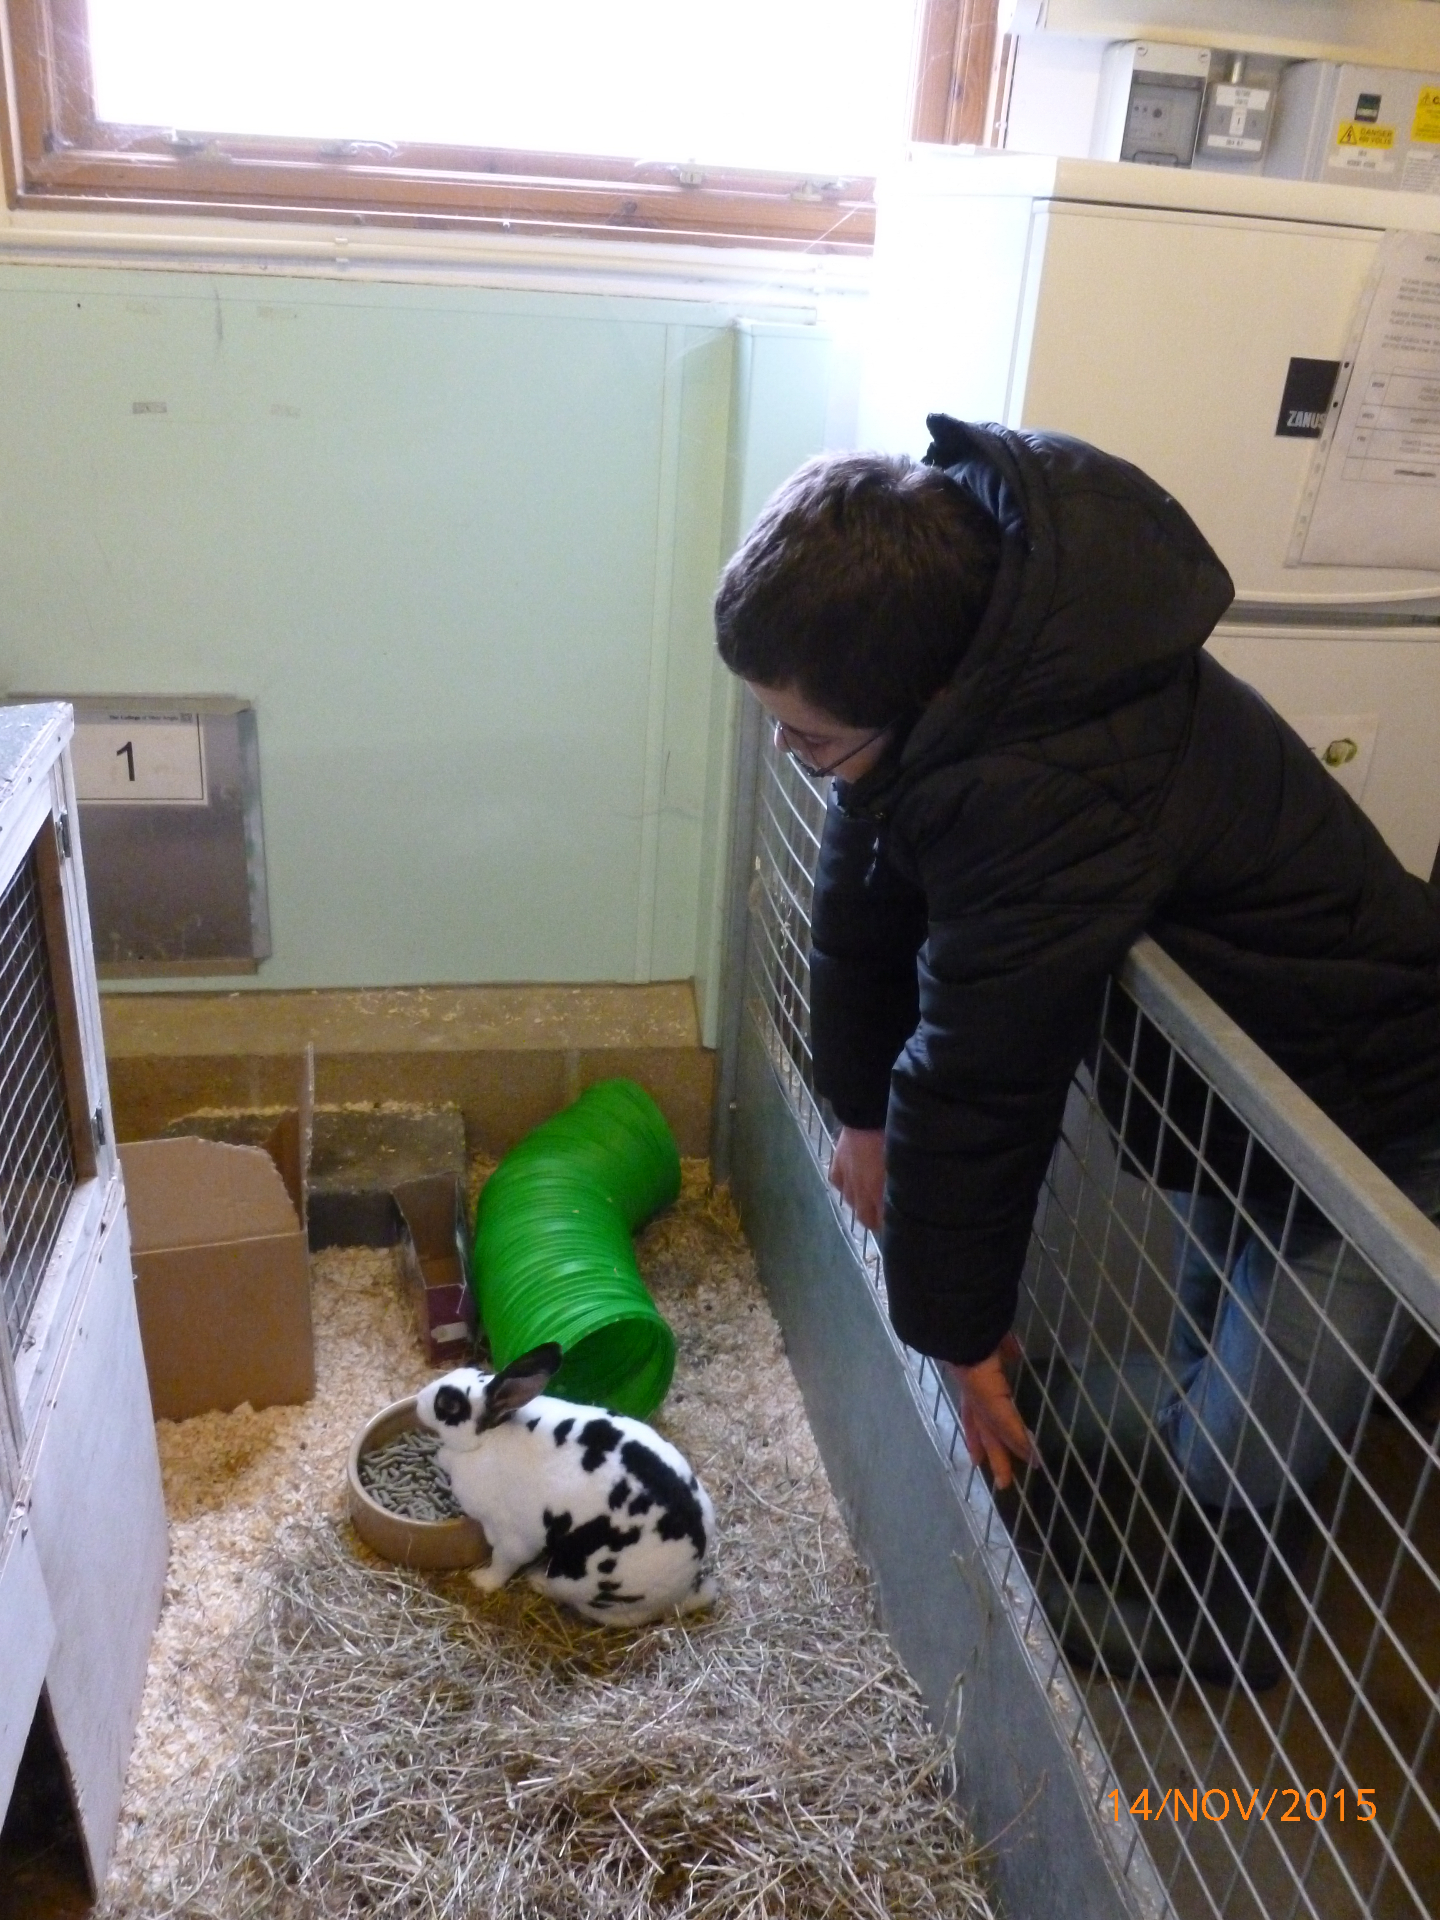 We enjoyed meeting the rabbits and guinea pigs 
Animal Experience - College of West Anglia